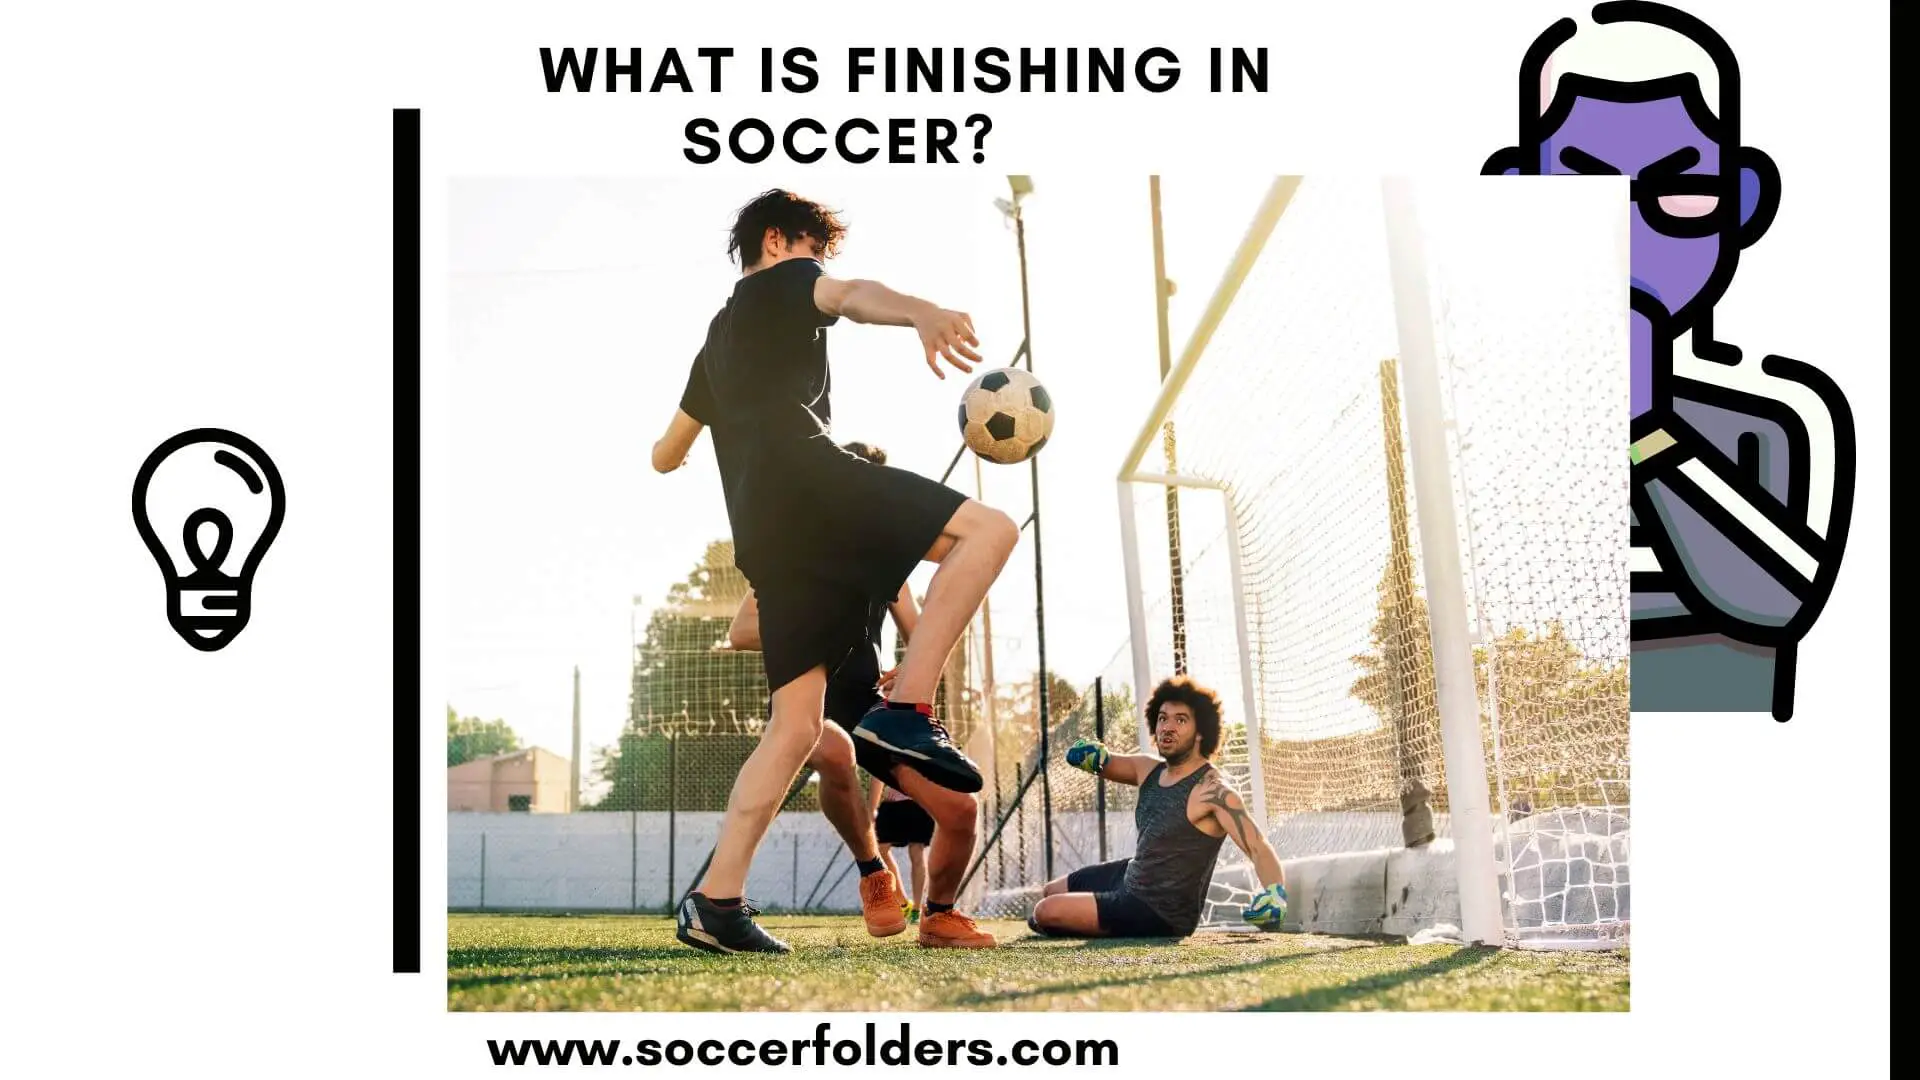 What is finishing in soccer - Featured image